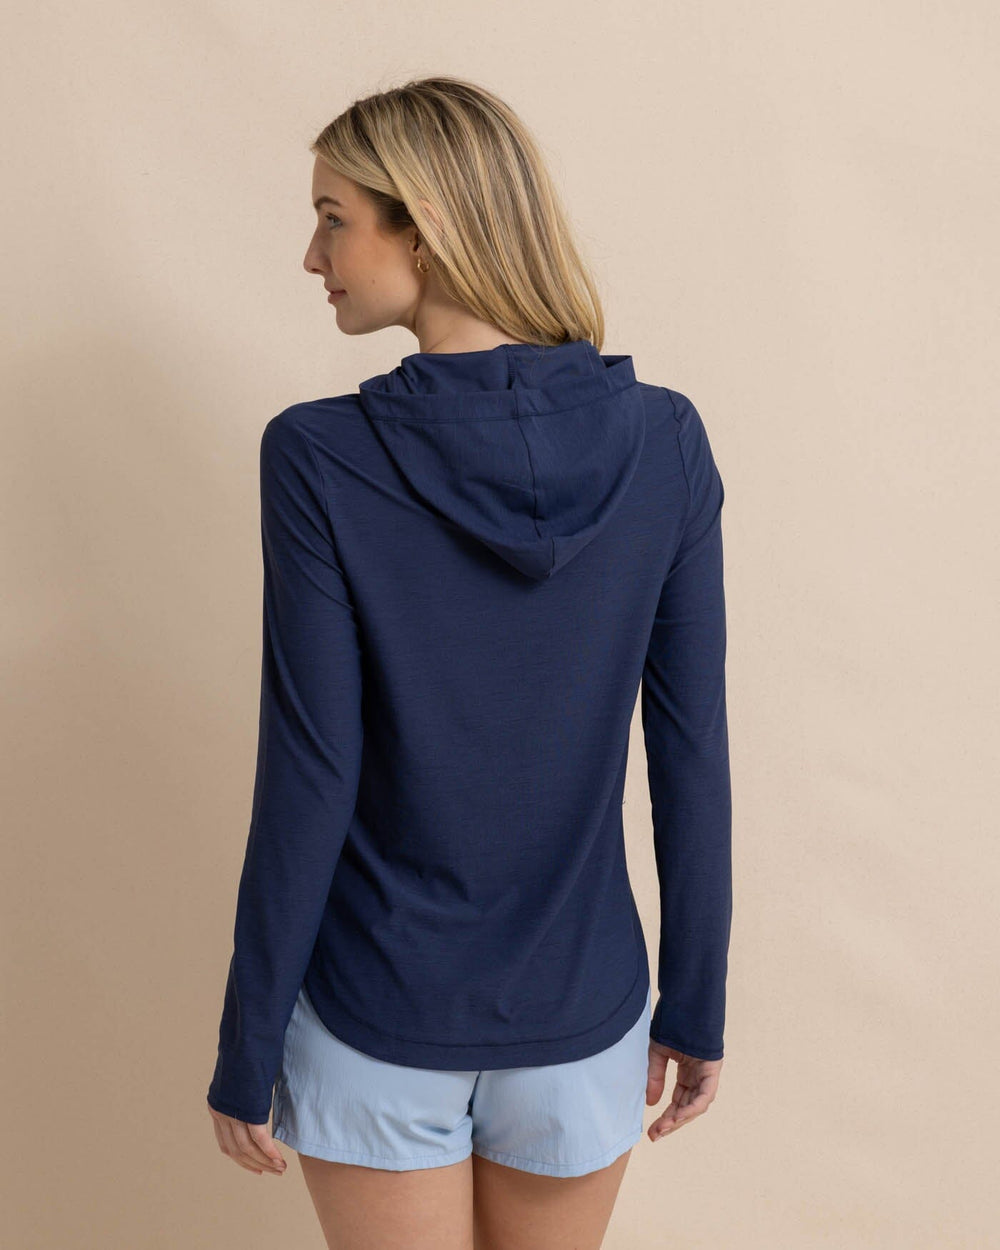 The back view of the Southern Tide Linley brrr illiant Performance Hoodie by Southern Tide - Nautical Navy